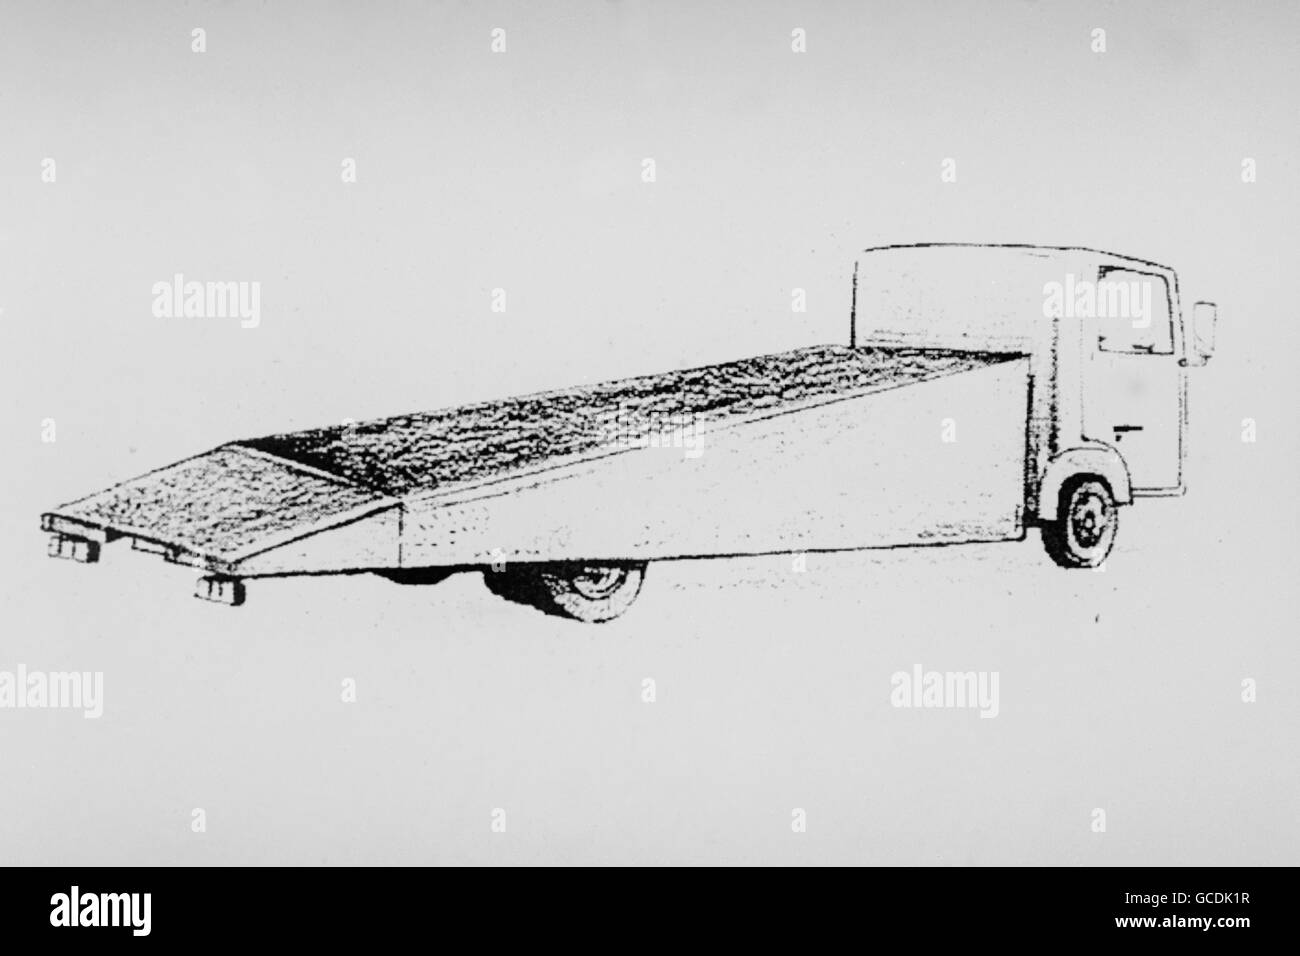 A POLICE ISSUED ARTIST'S IMPRESSION OF A BLUE FLAT-BACK LORRY, PROBABLY BASED ON A FORD CARGO CHASSIS, WHICH POLICE WISH TO TRACE IN CONNECTION WITH THE IRA BOMB EXPLOSION NEAR SOUTH QUAY DOCKLANDS LIGHT RAILWAY STATION - REGISTRATION C292 GWG. Stock Photo